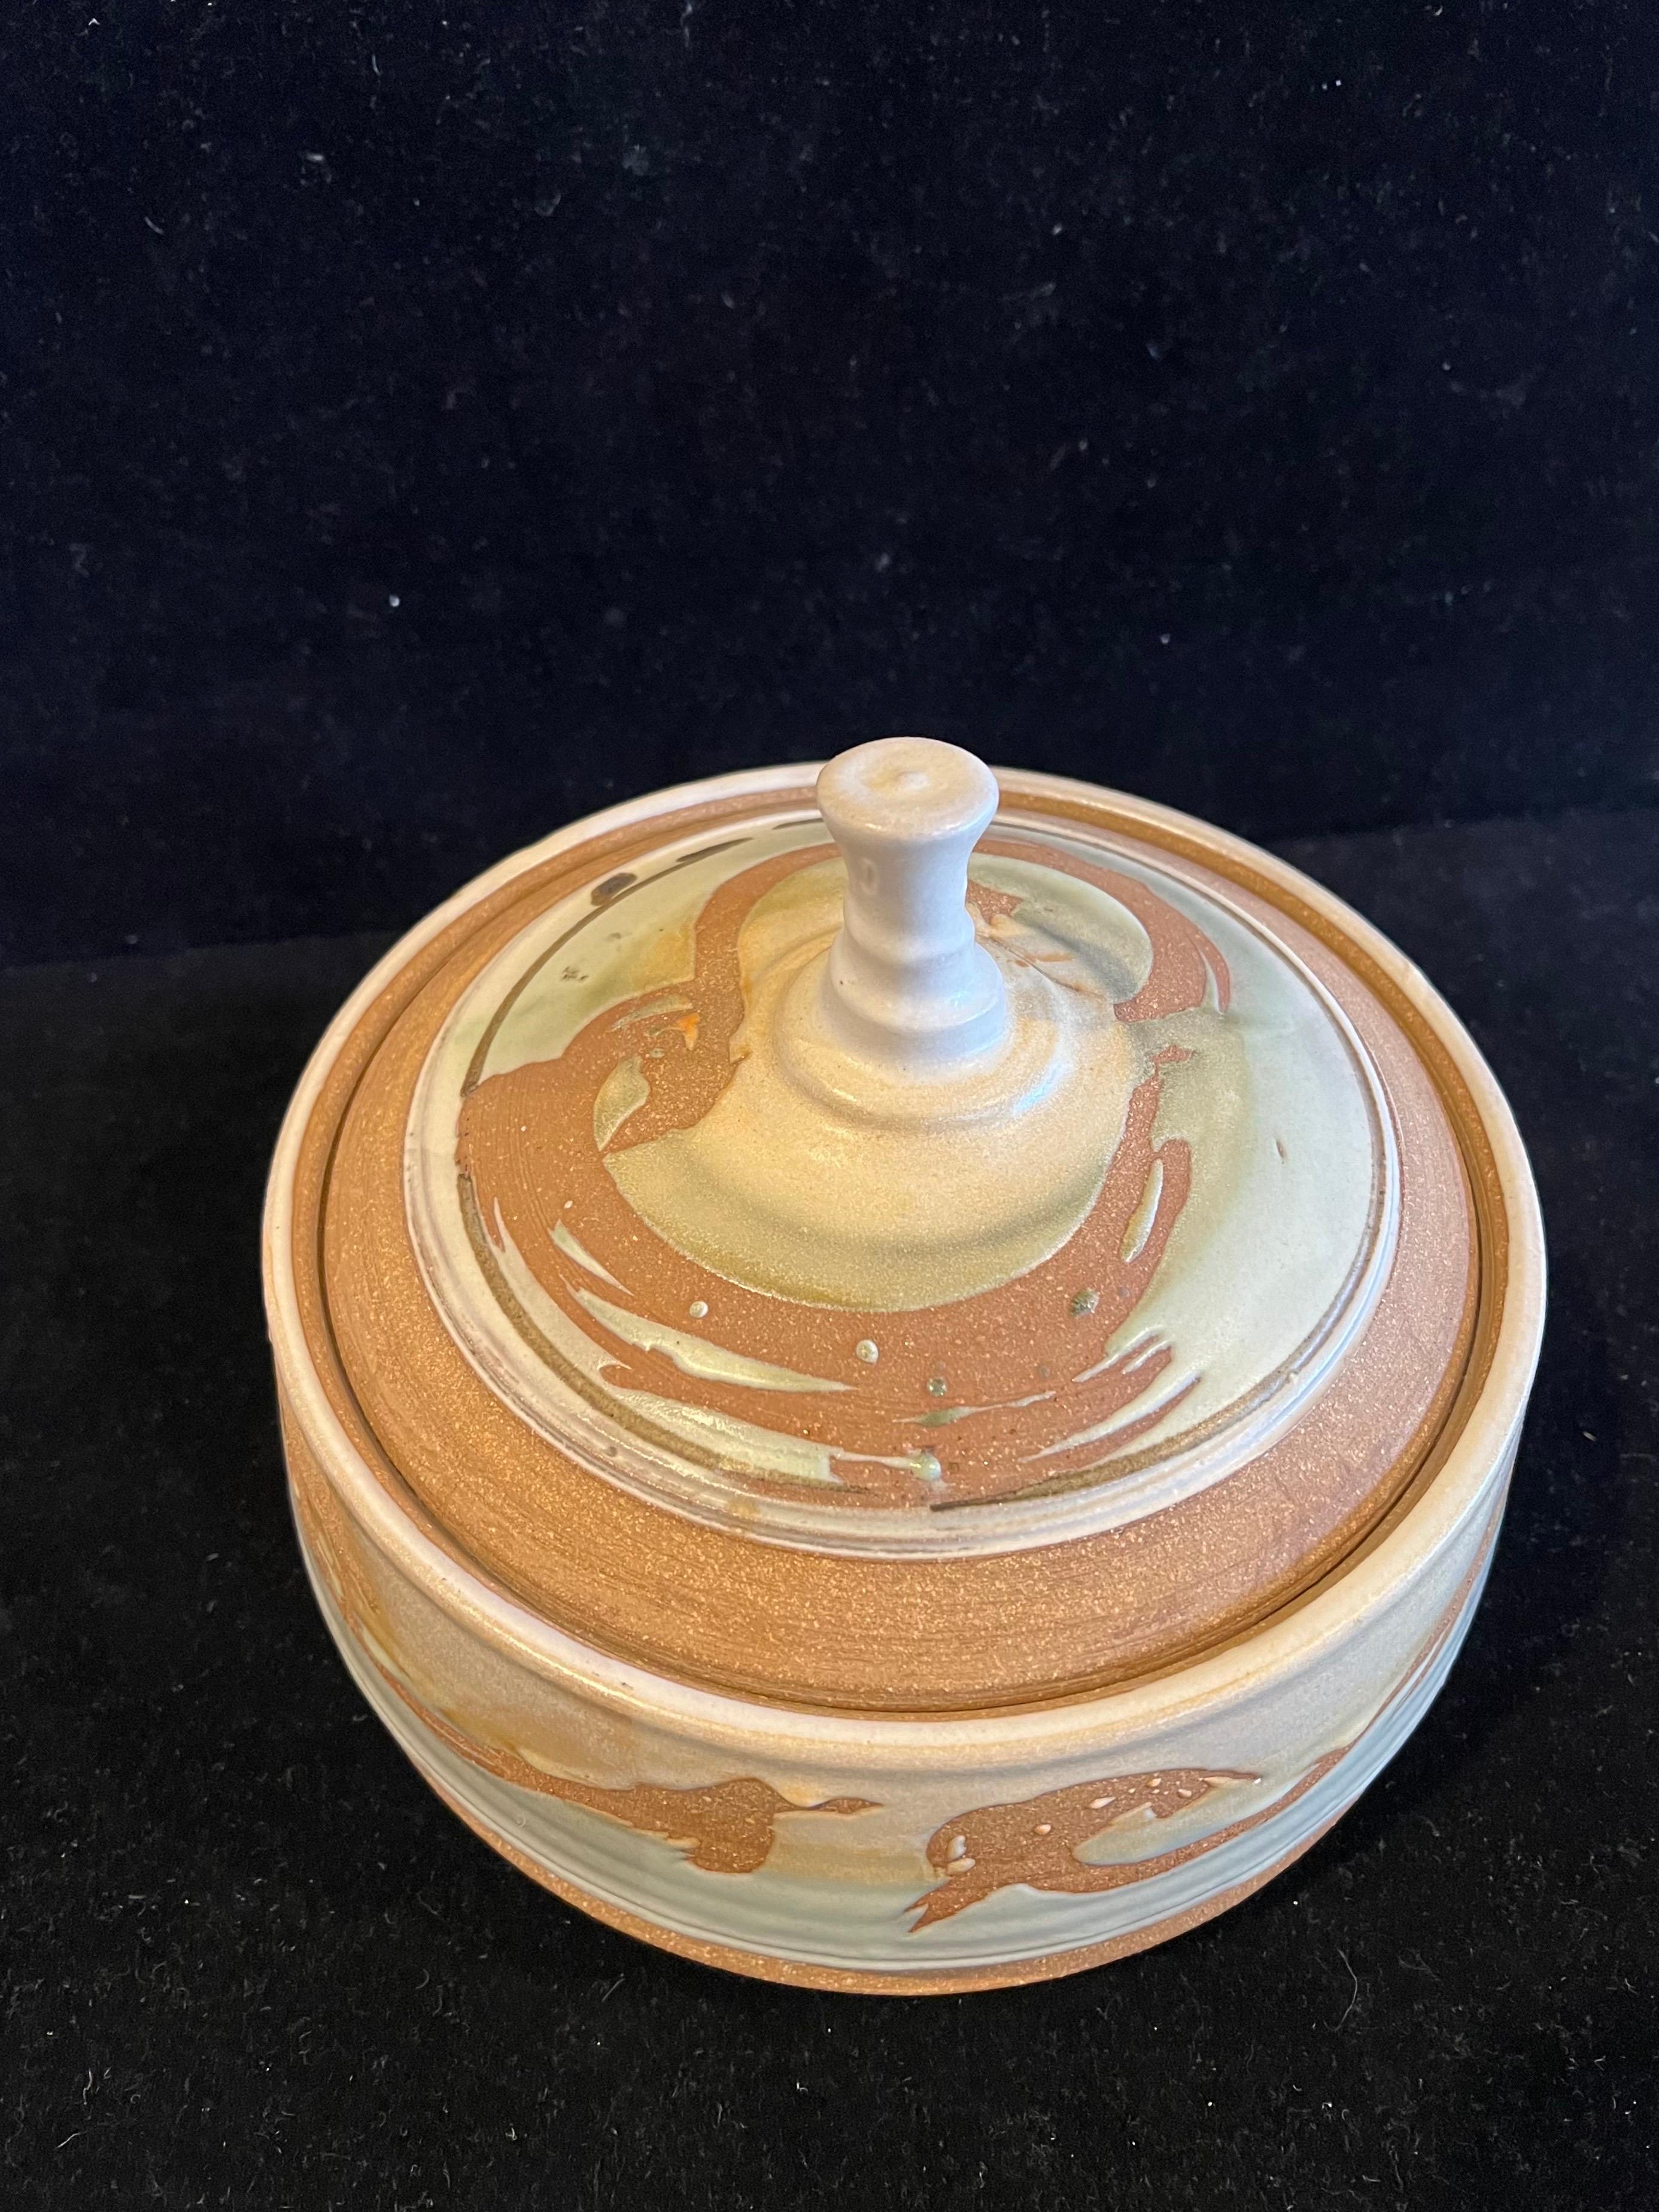 20th Century Vintage Signed Studio Pottery Covered Dish by Don Hanson1970's